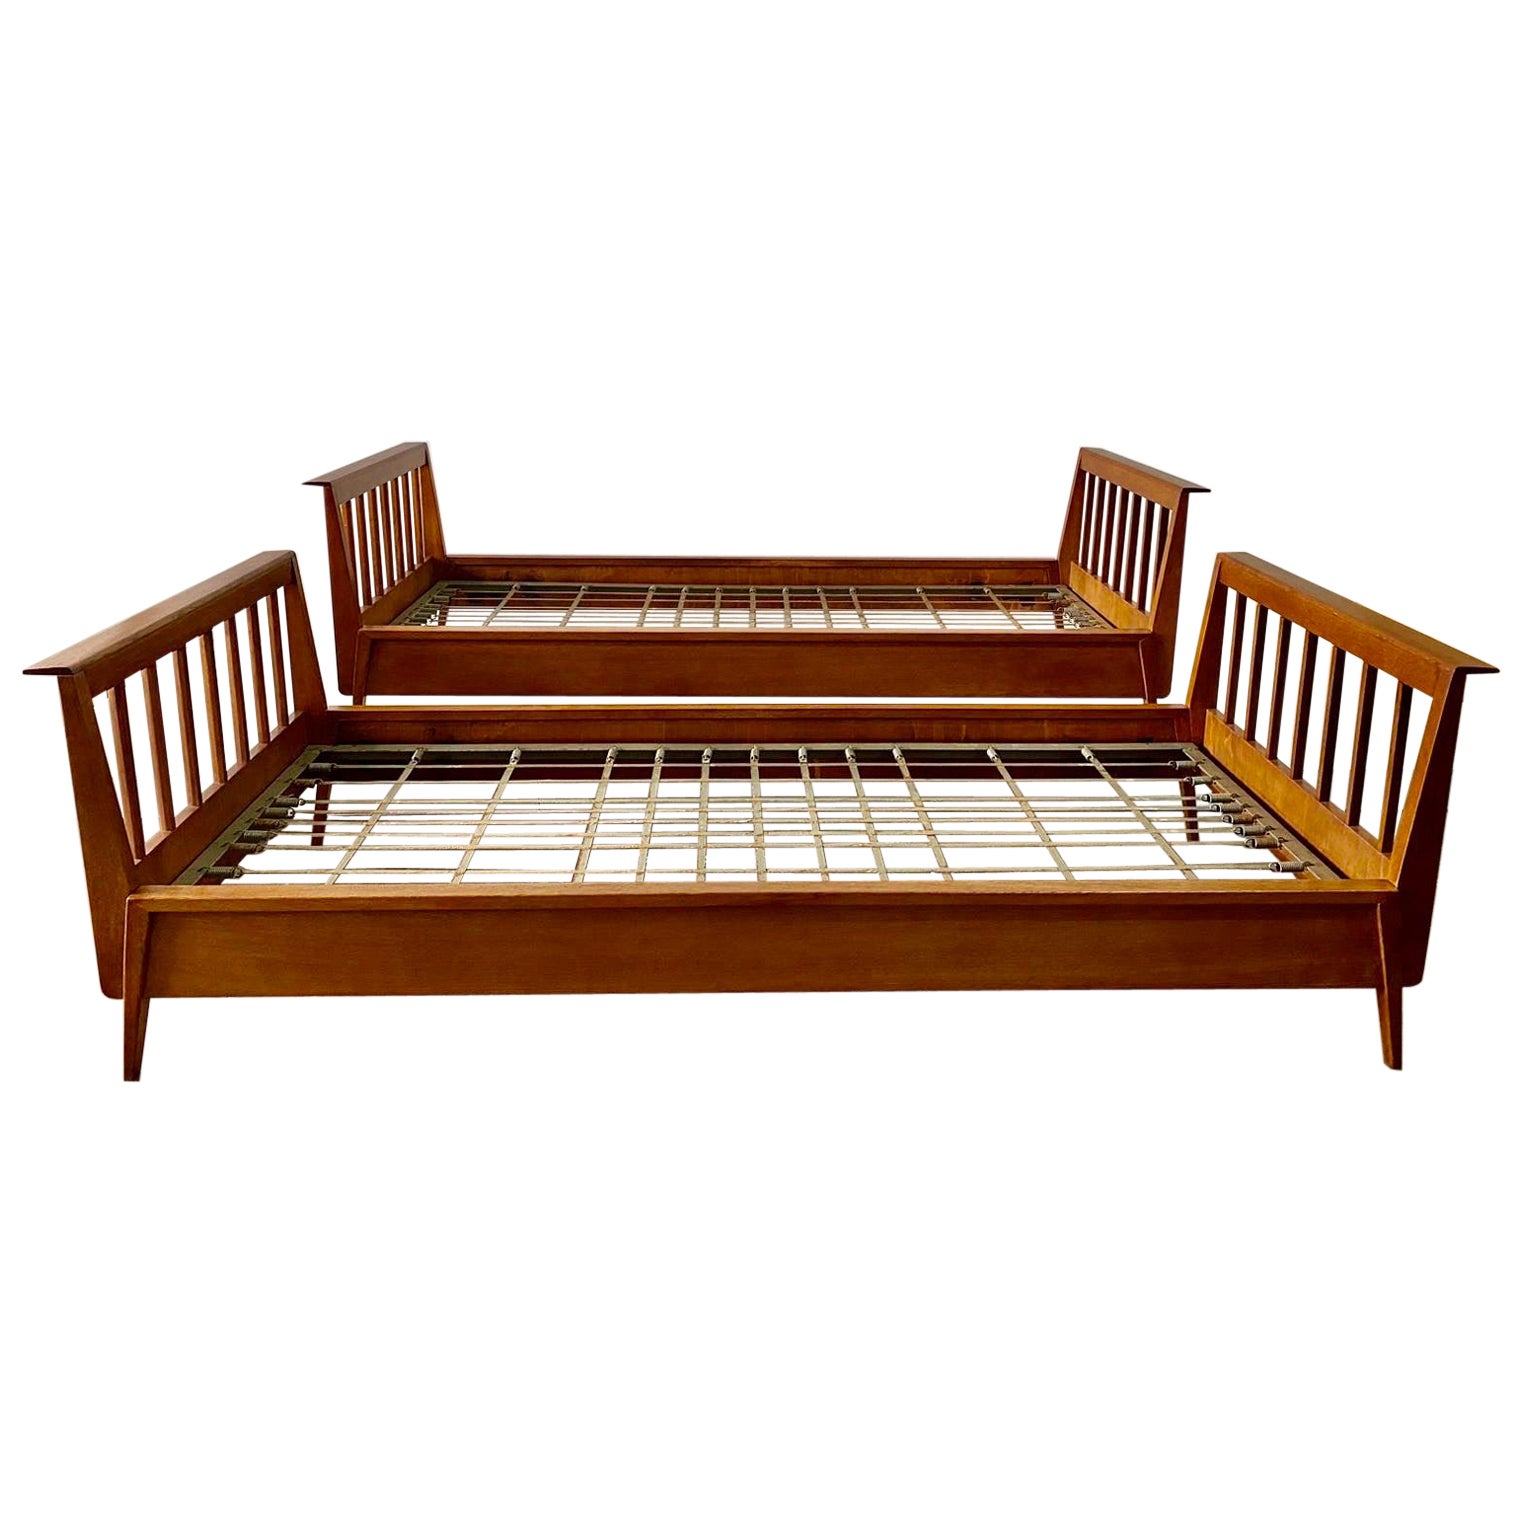 An outstanding and RARE to find PAIR of original René Gabriel daybeds/ twin beds from the reconstruction period in exquisite original patina to wood.  Flared tops on both ends, clean lines and flat spindle bar ends.  The metal frame base is original